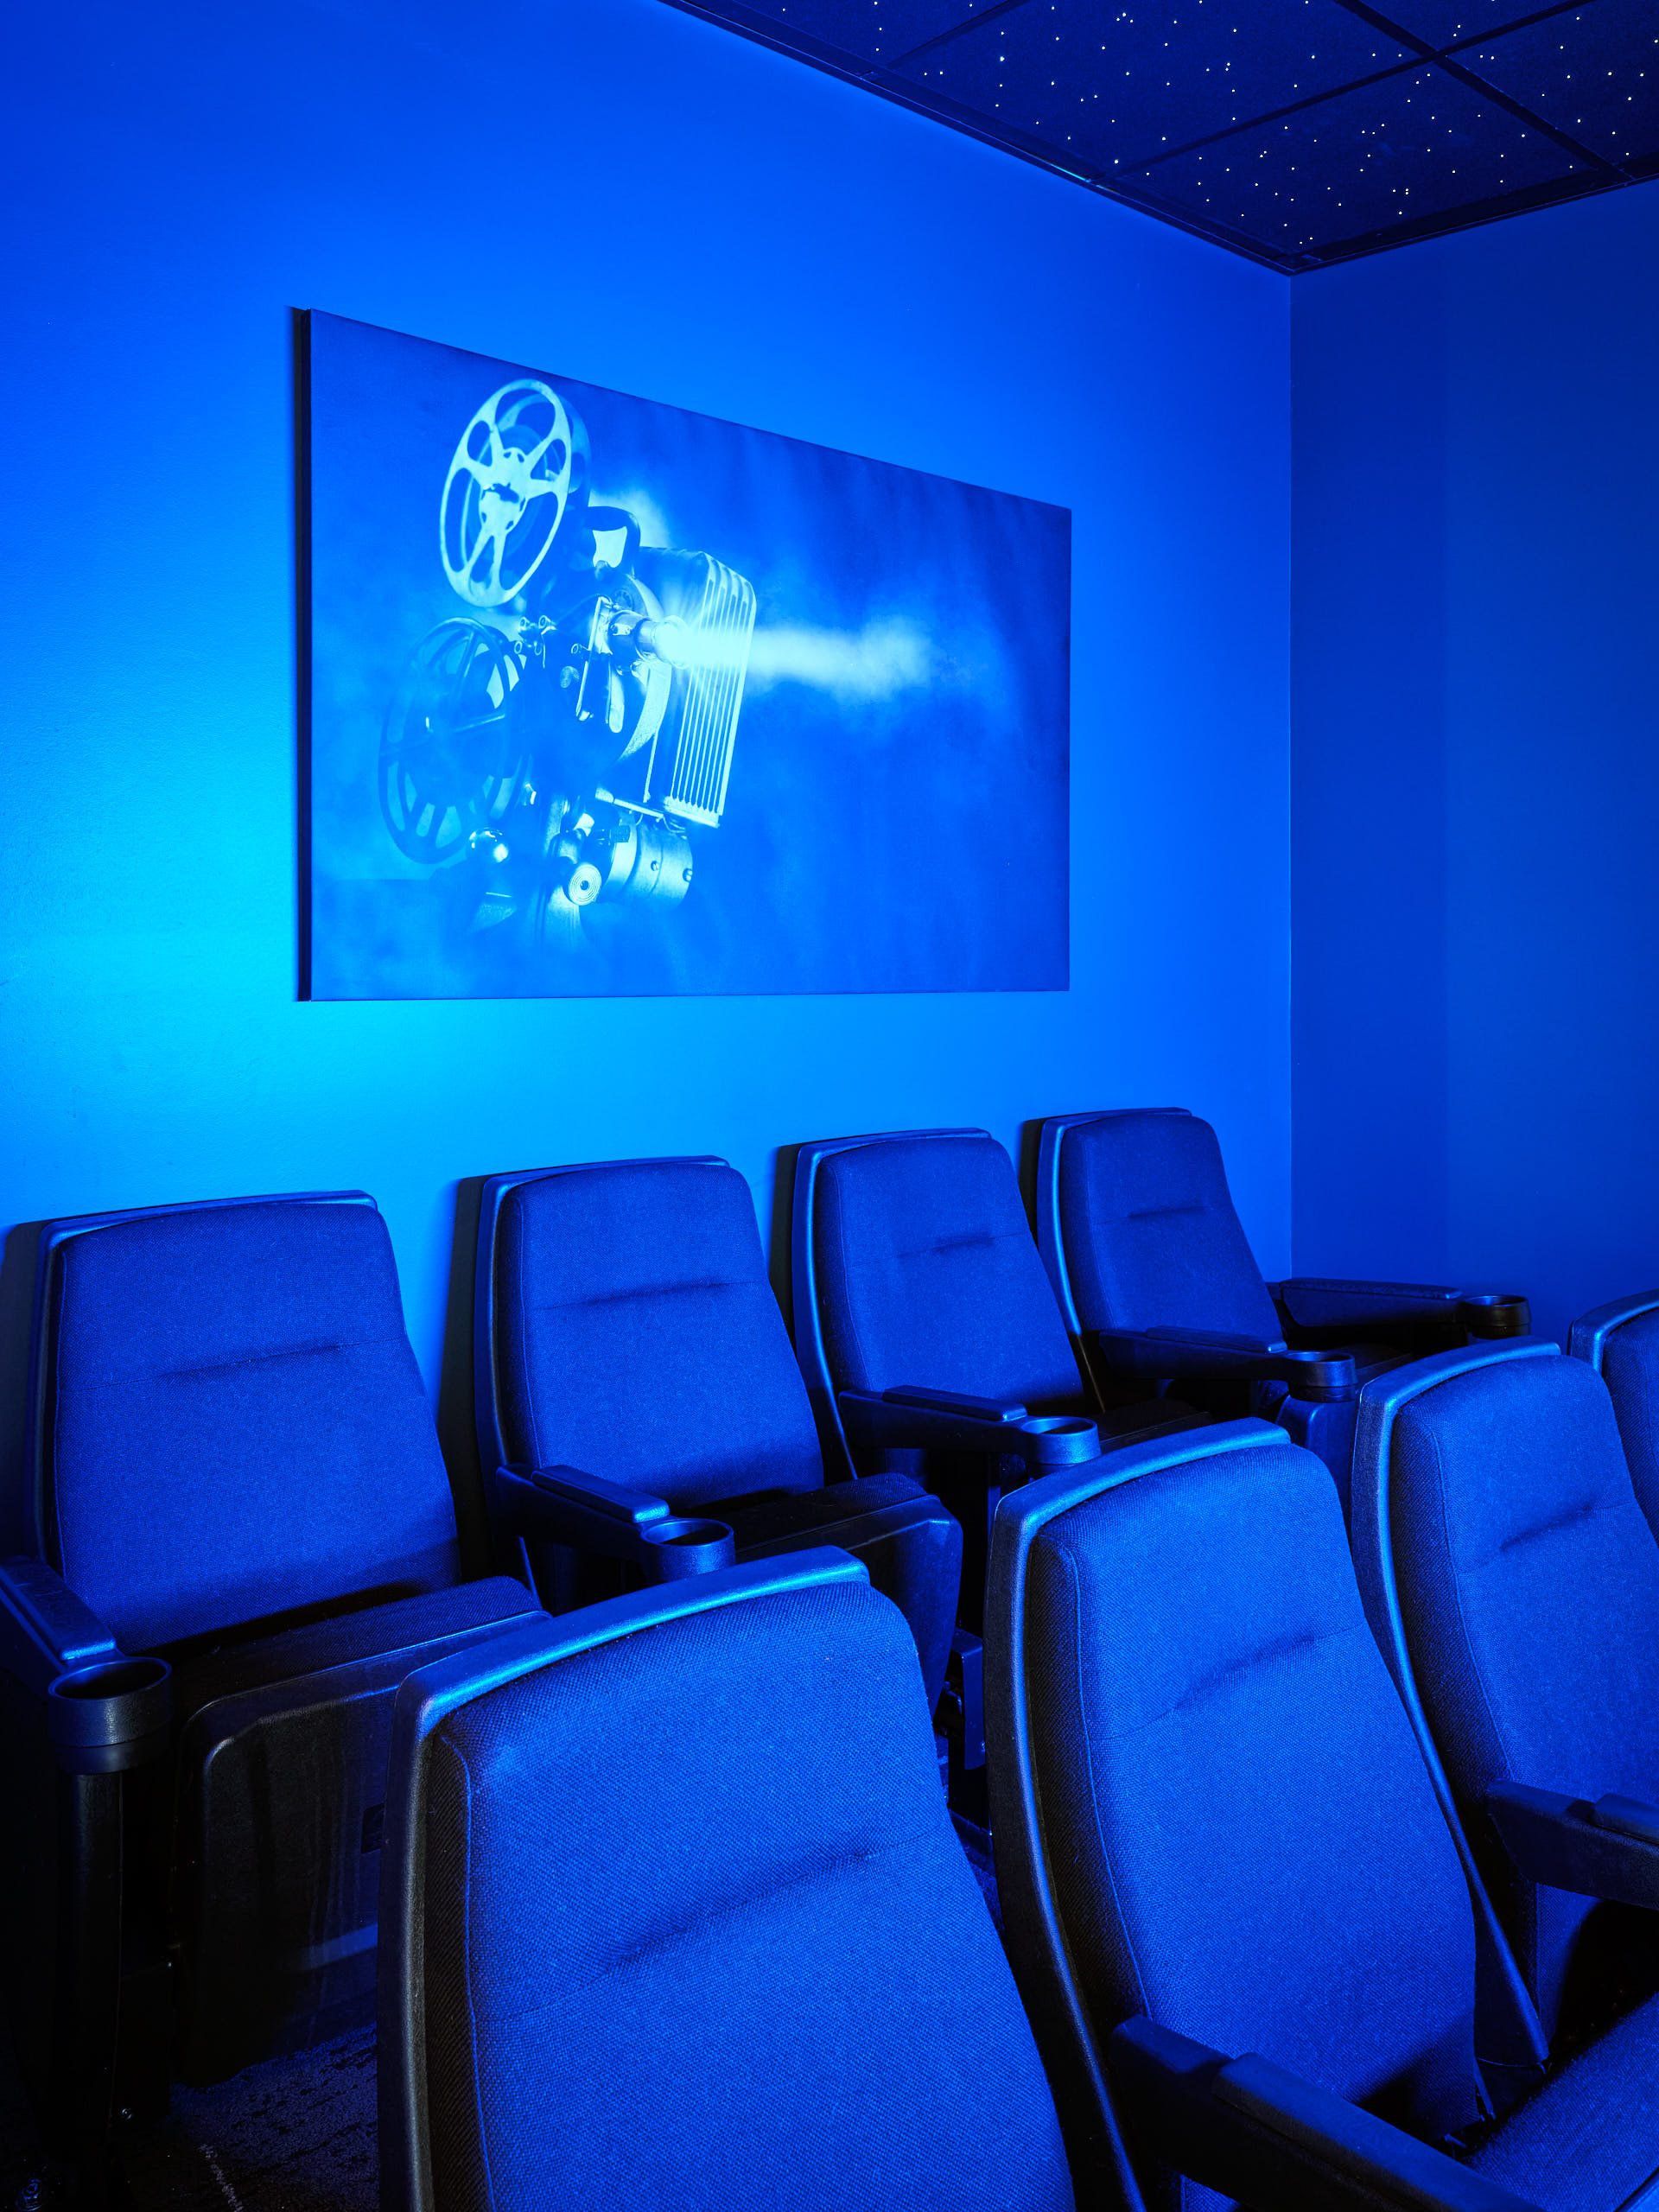 Commercial interior photography by Warren Diggles. 2 point perspective of Richter Orthodontics theater room. Project by Design Ergonomics, VFLA Architects, and Elder Construction.